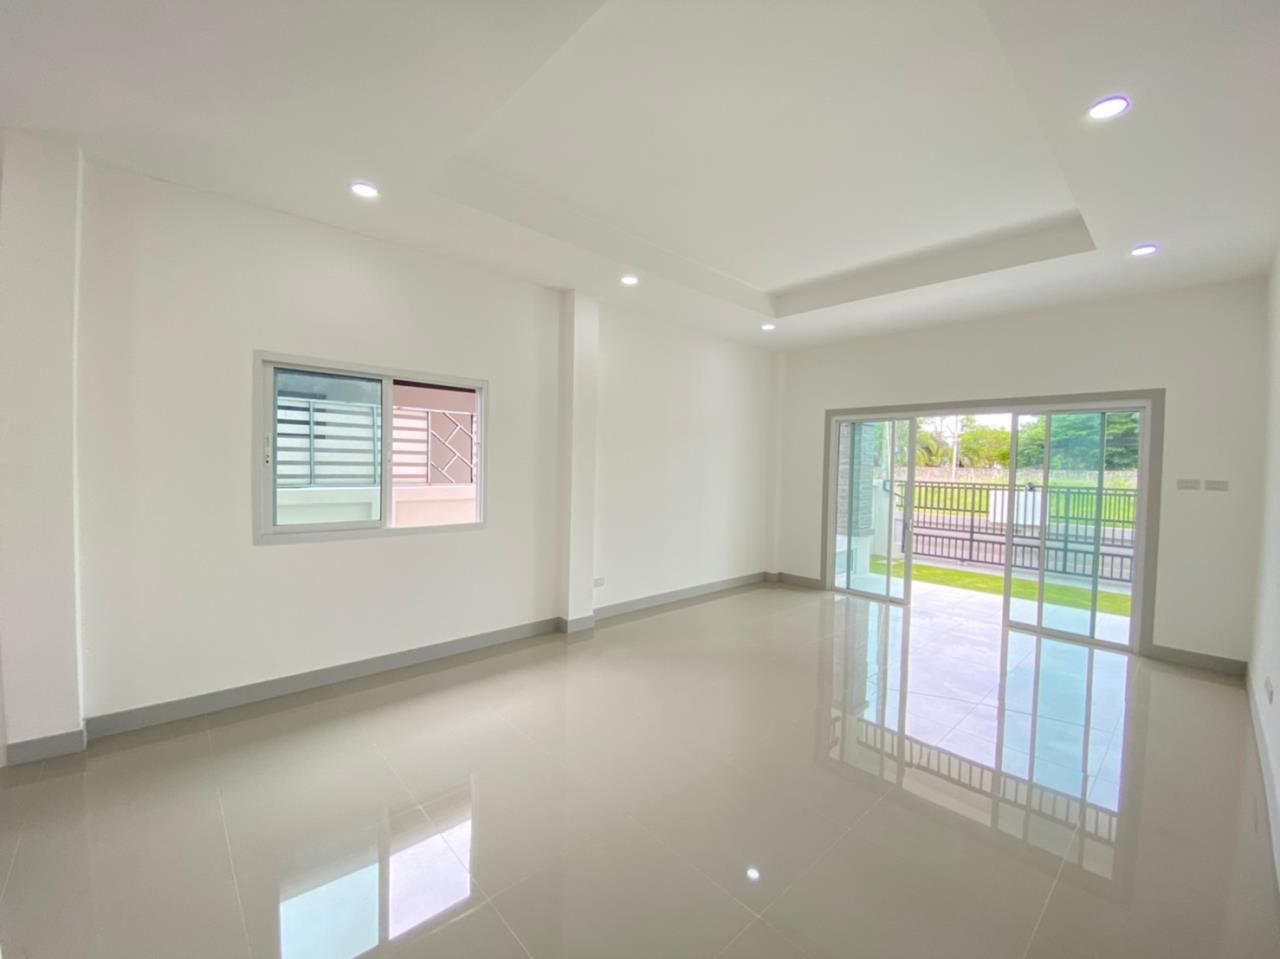 Thaiproperty1 Agency's New Single Storey House Project With Affordable Price - Hua Hin 6